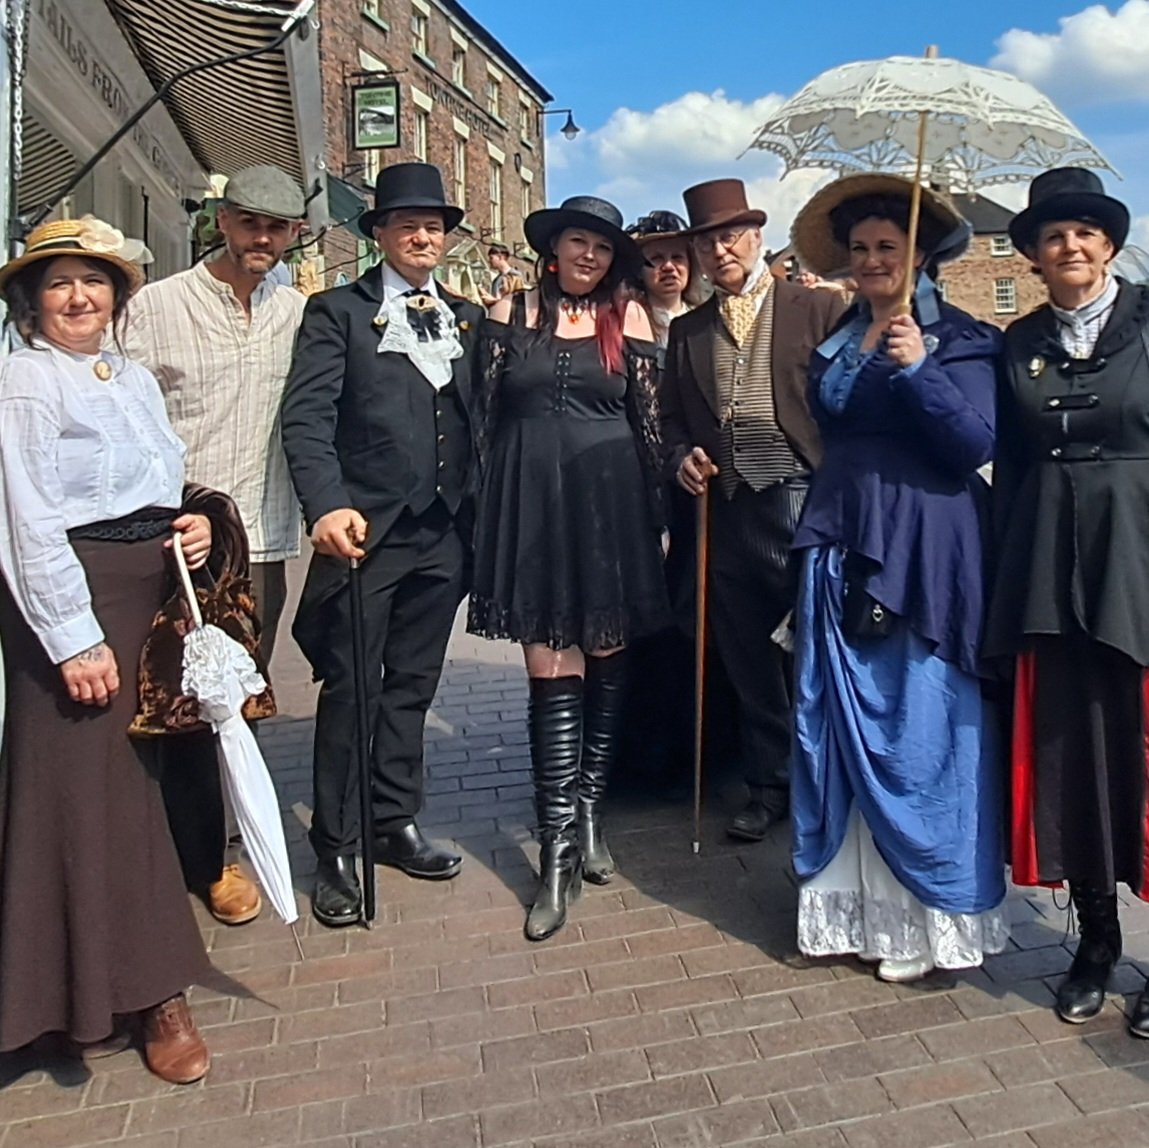 We bumped into a lovely crowd this afternoon in Ironbridge. They had been to Blists Hill Victorian Town How wonderful do they look
Don't miss visiting Blists Hill Victorian Town during your stay.
#ironbridge #historical #historicalfashion @visit